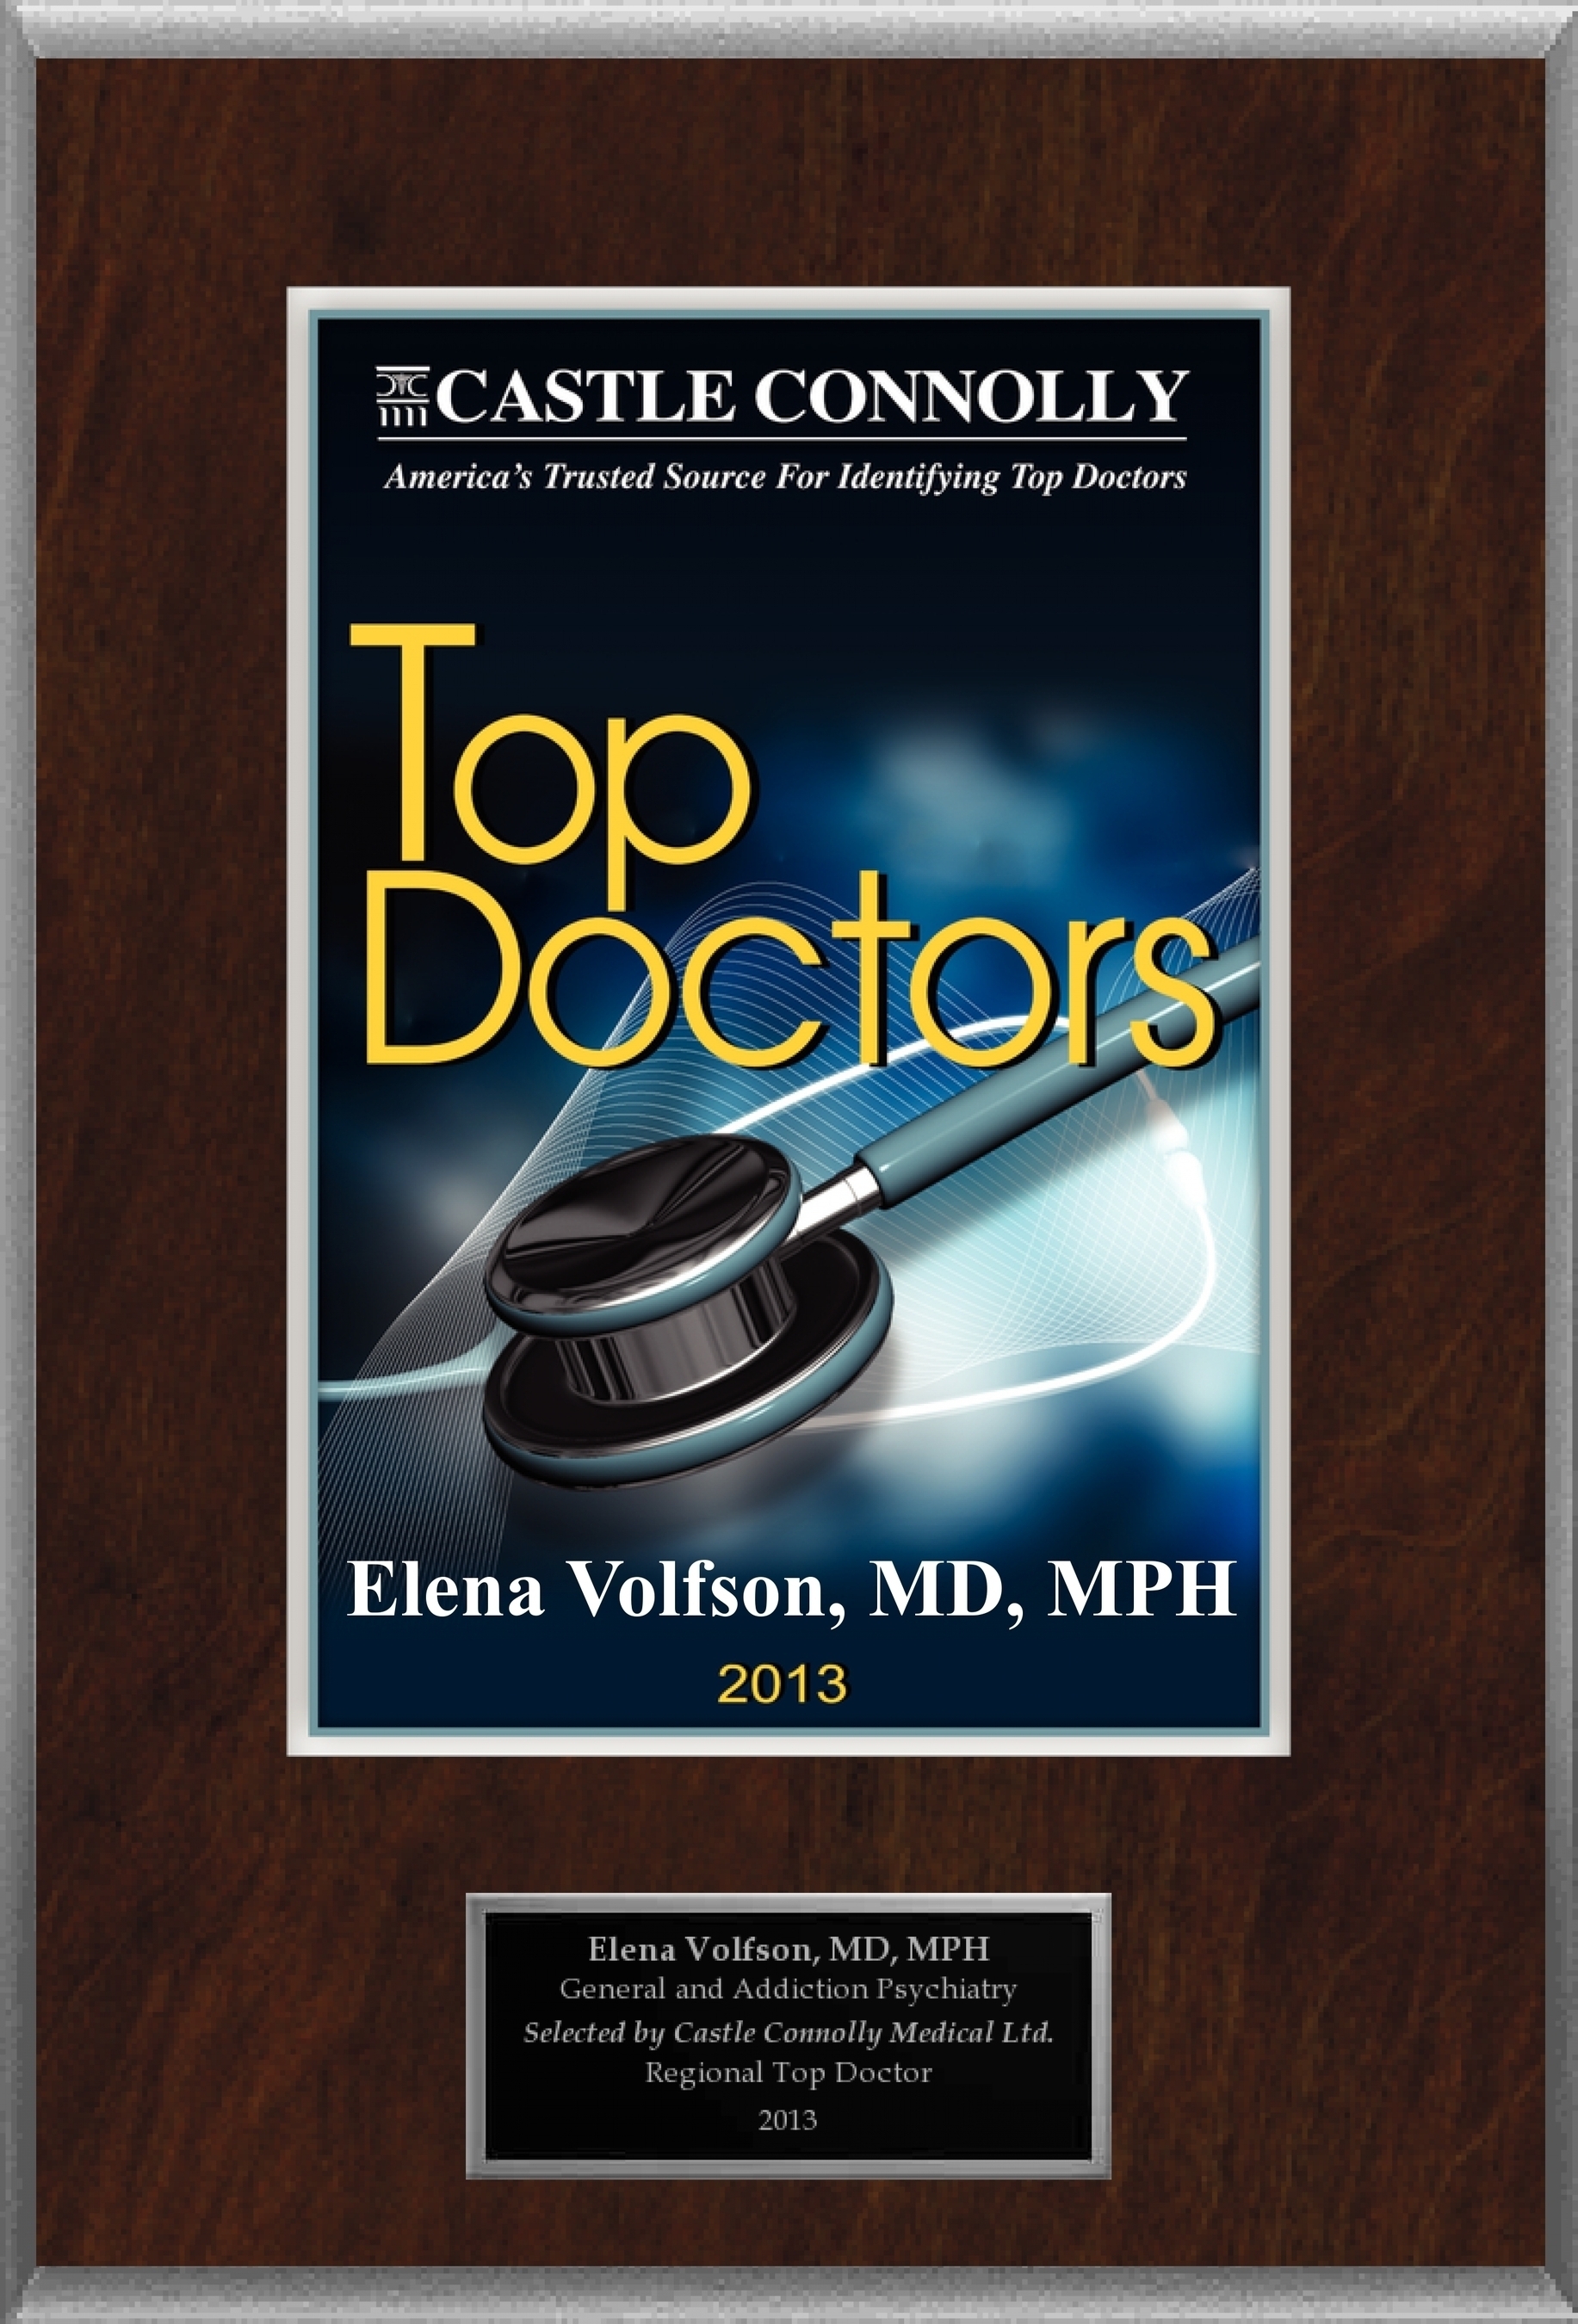 Dr. Elena Volfson, MD, MPH is recognized among Castle Connolly's Top Doctors(R) for Haverford, PA region in 2013. (PRNewsFoto/American Registry)